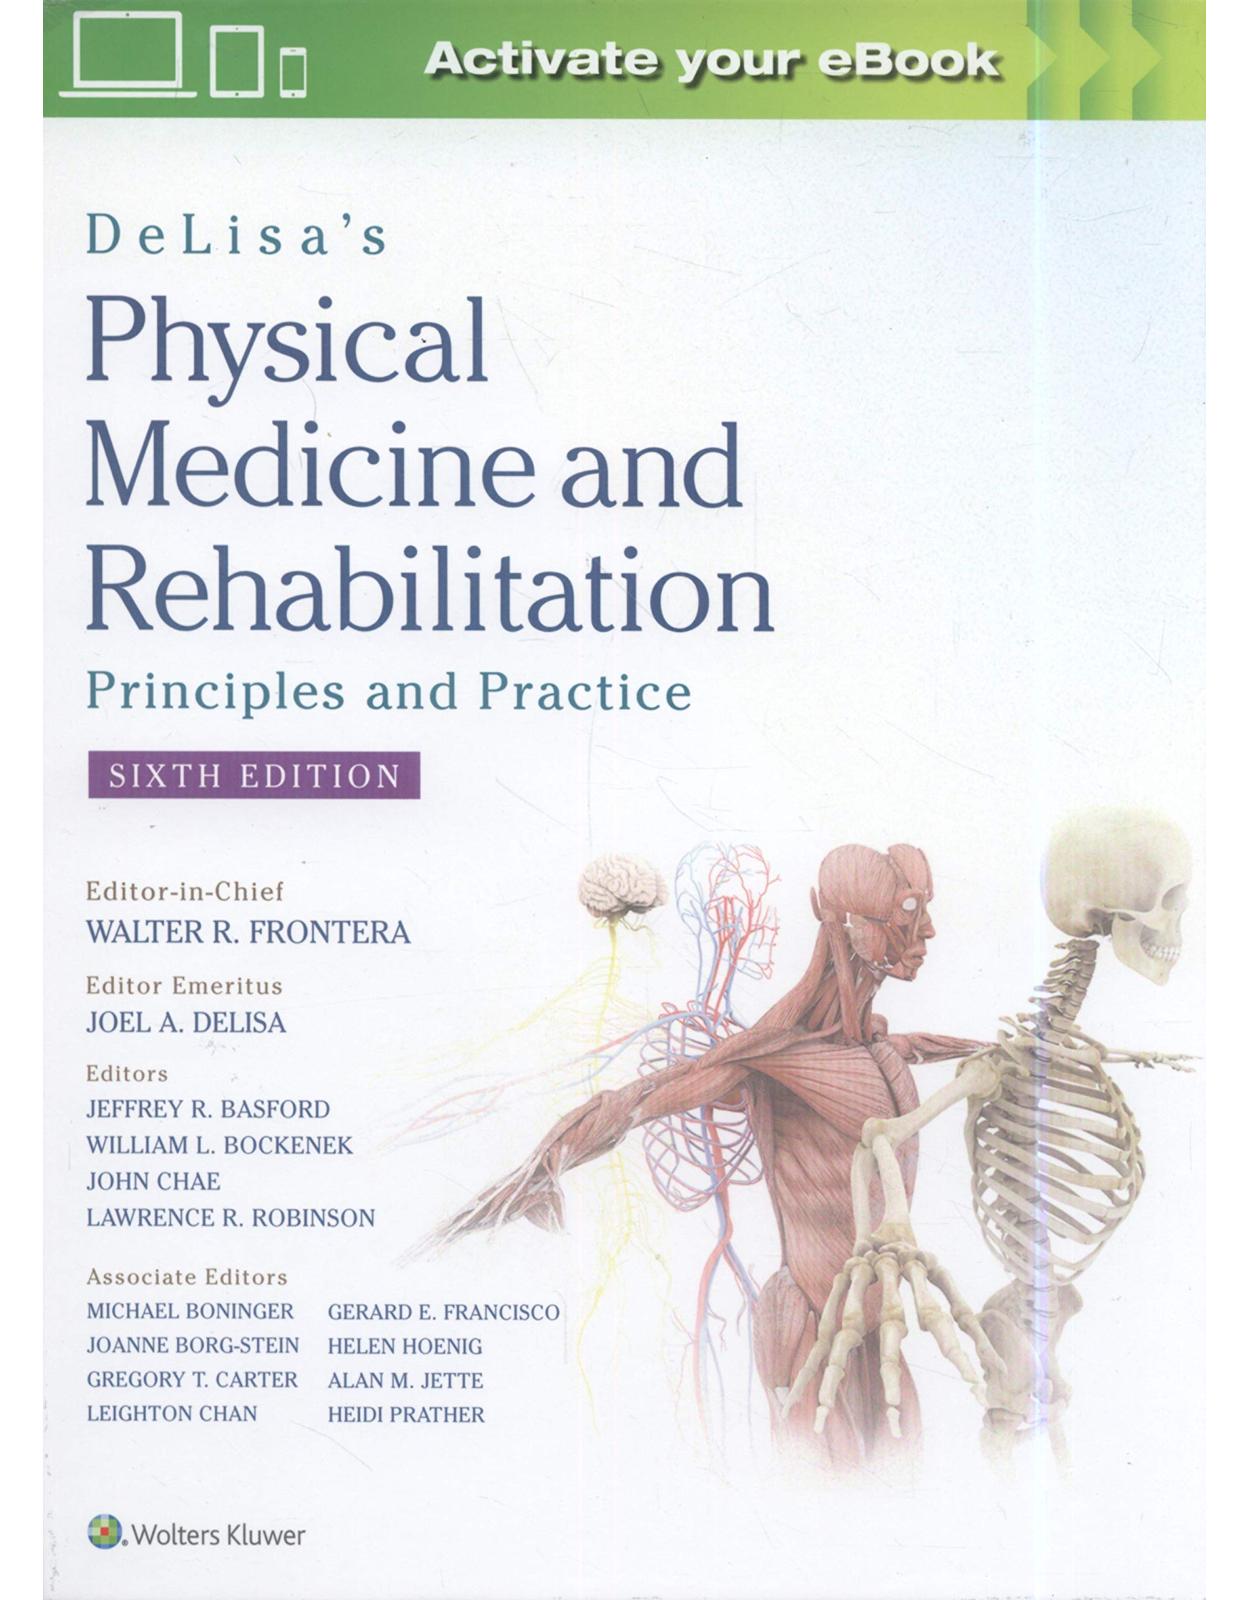 DeLisa’s Physical Medicine and Rehabilitation: Principles and Practice. Sixth edition